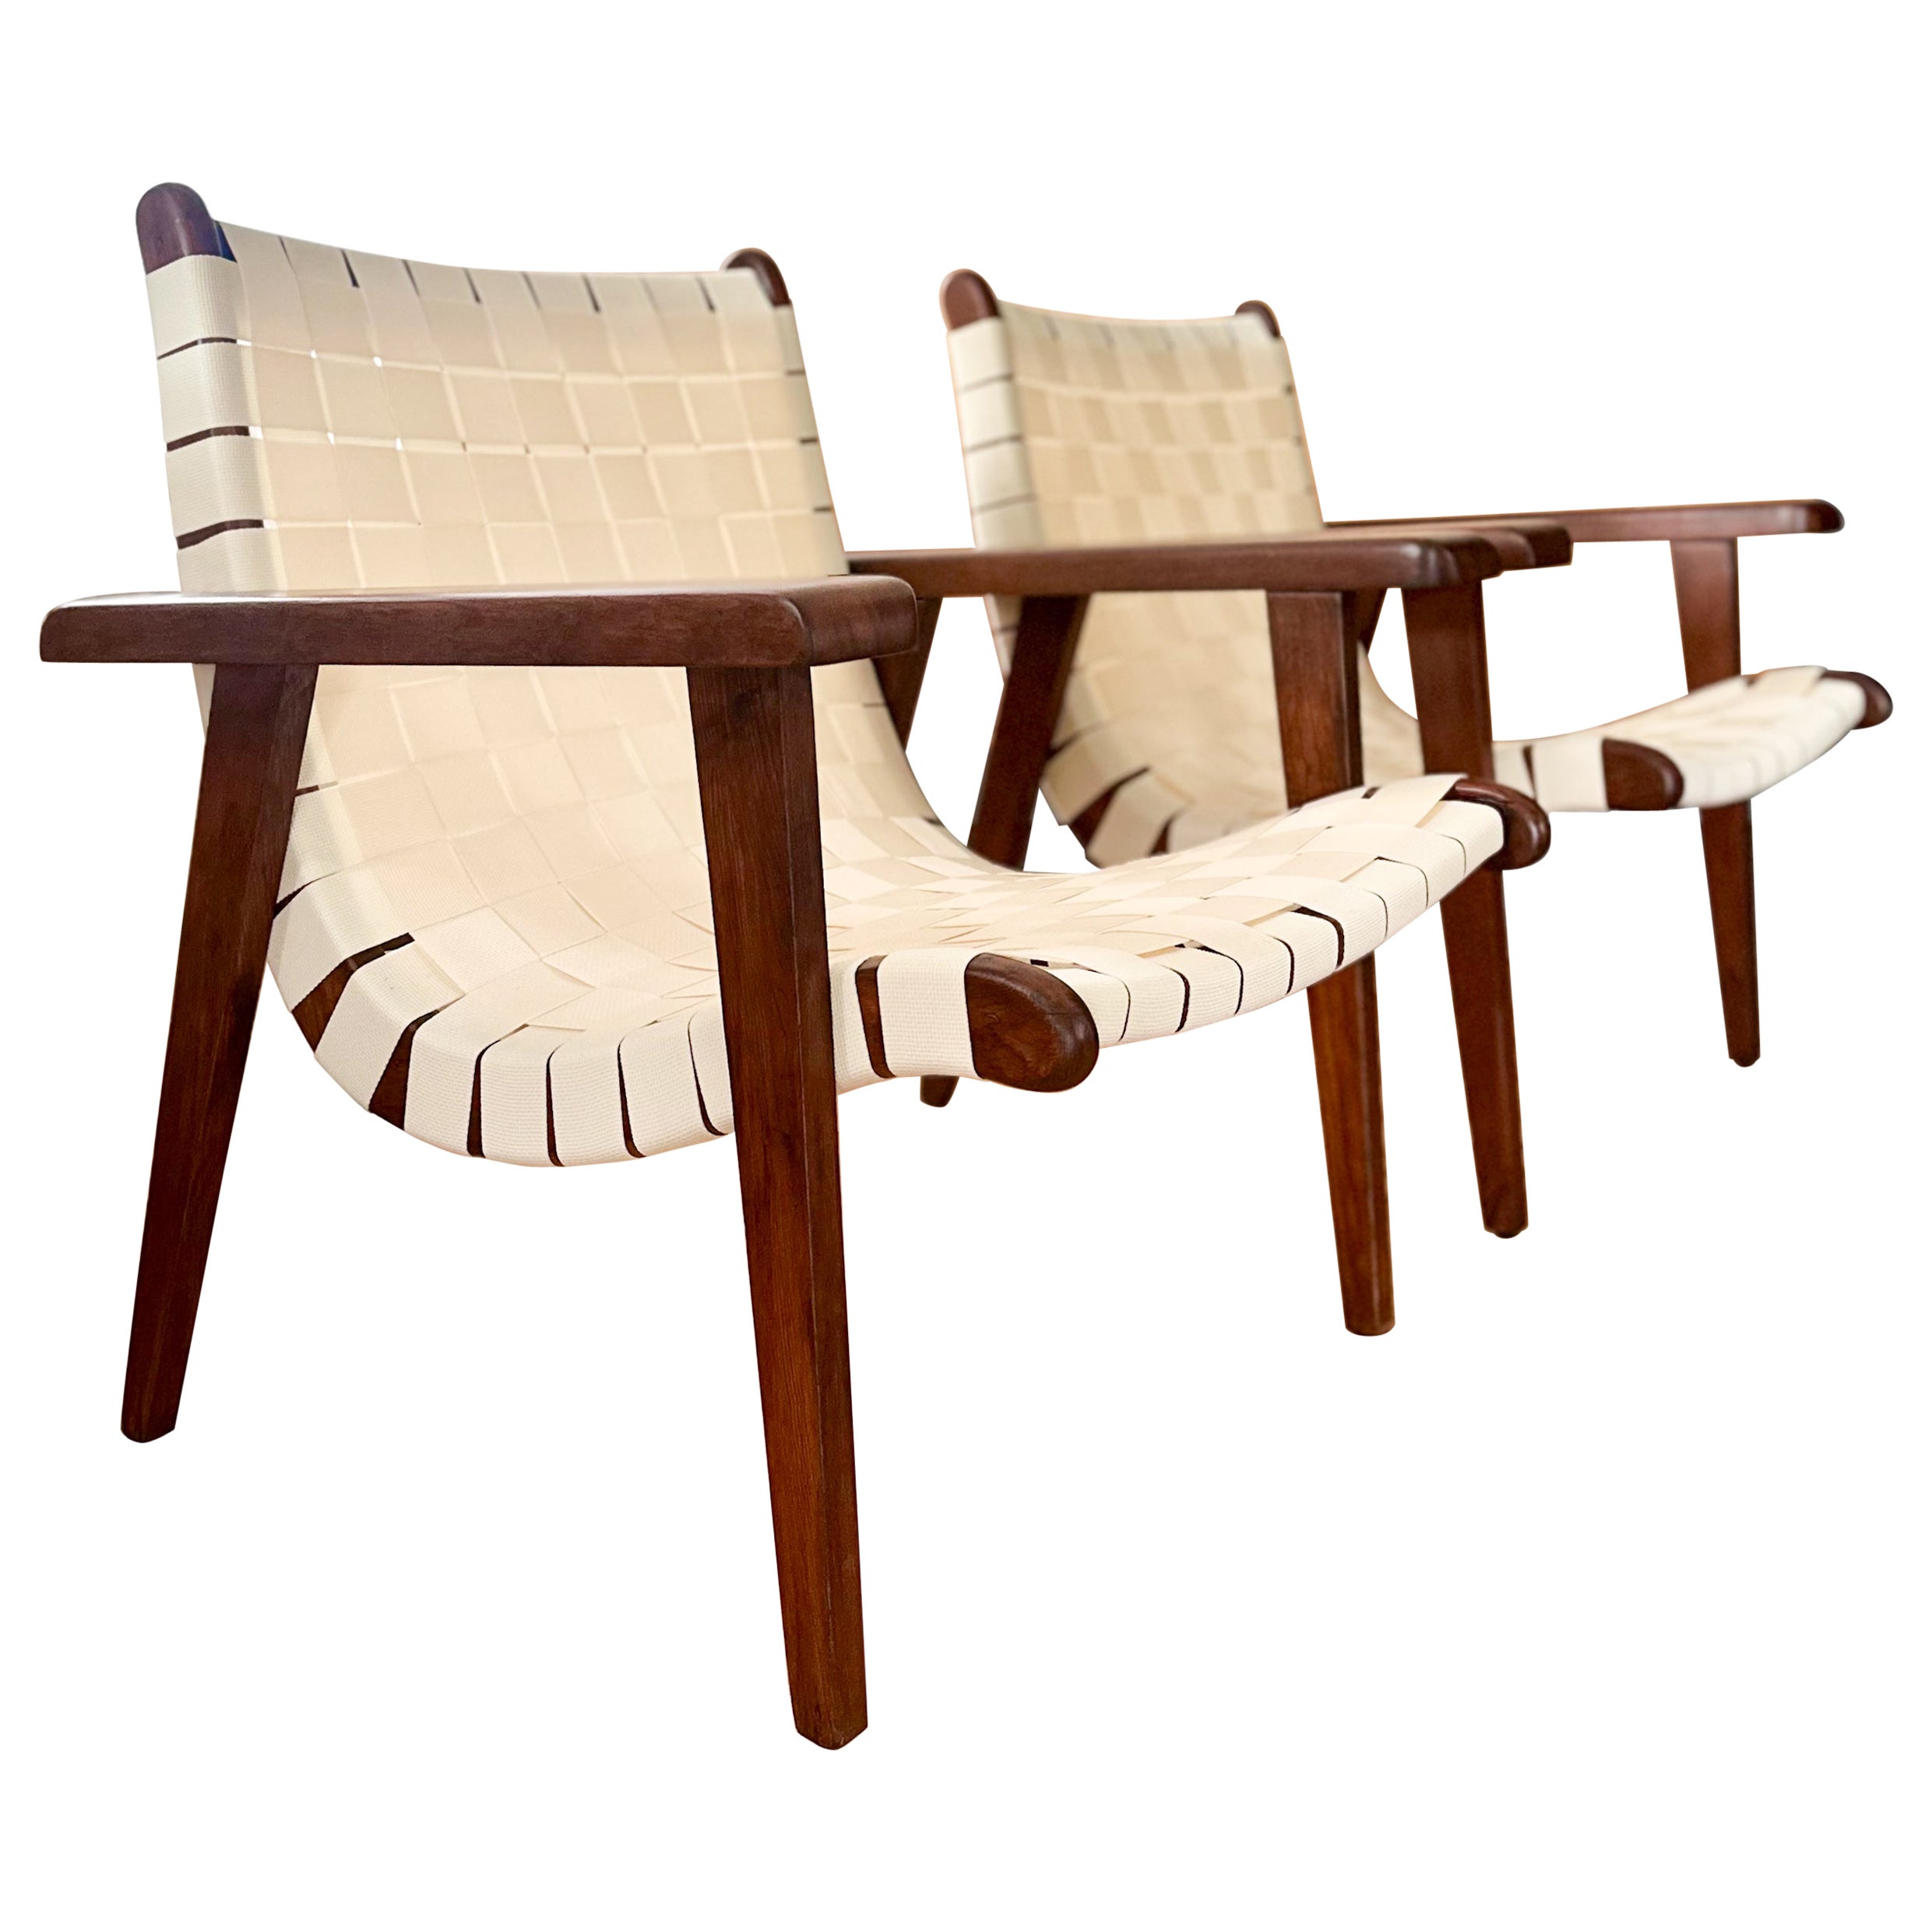 1950s 'San Miguelito' Arm Chairs by Michael Van Beuren for Domus - a pair For Sale